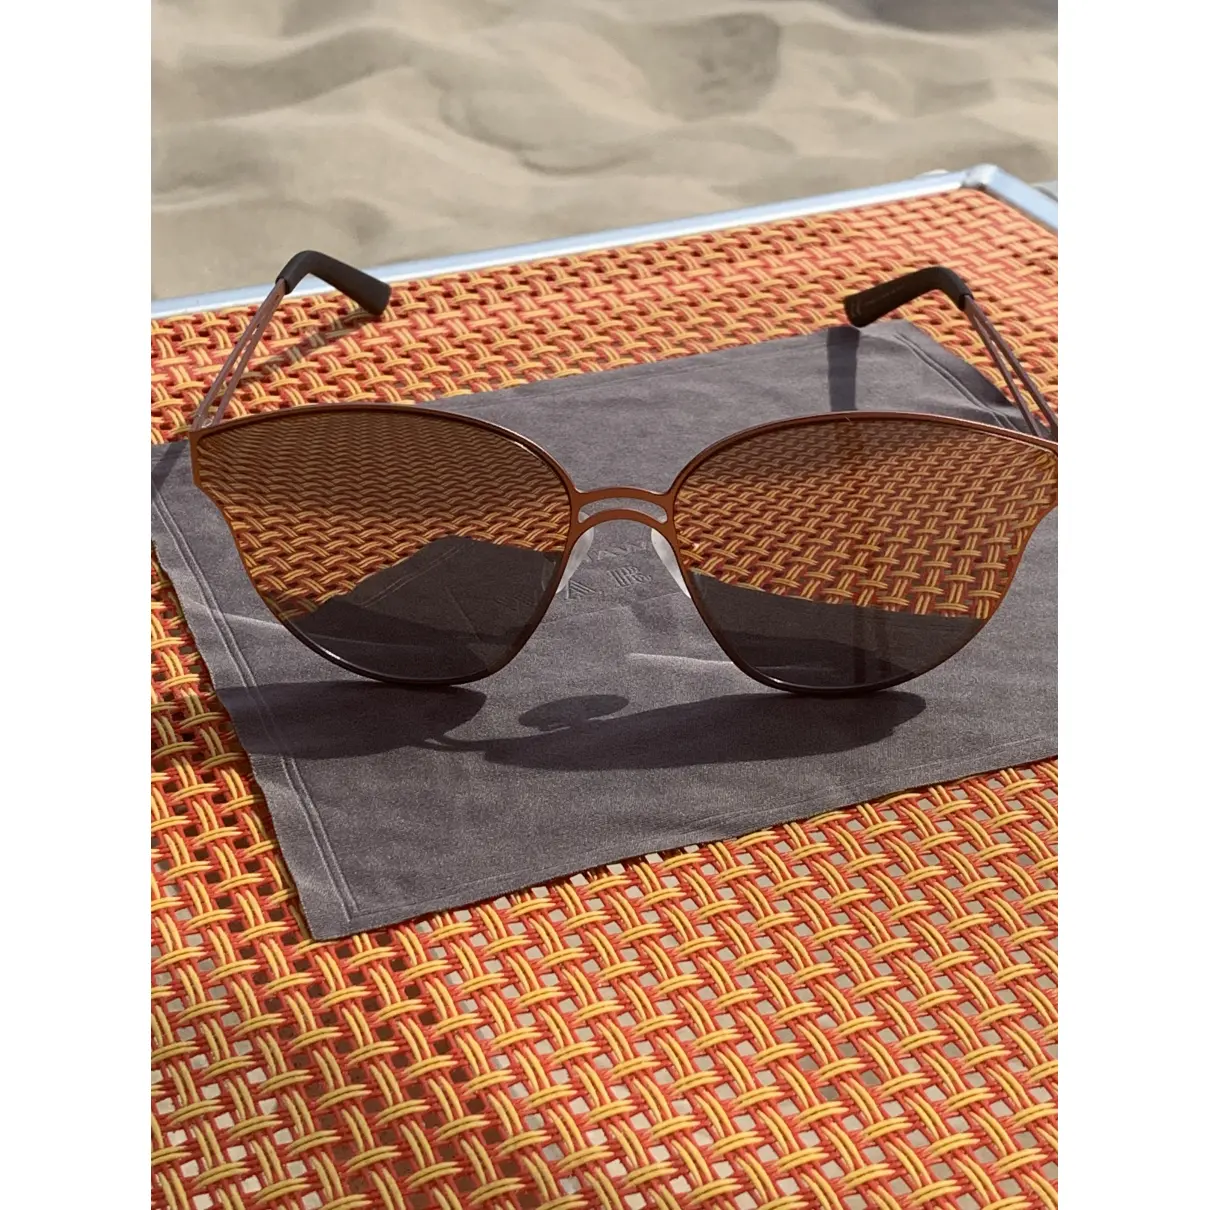 Buy Hawkers Sunglasses online